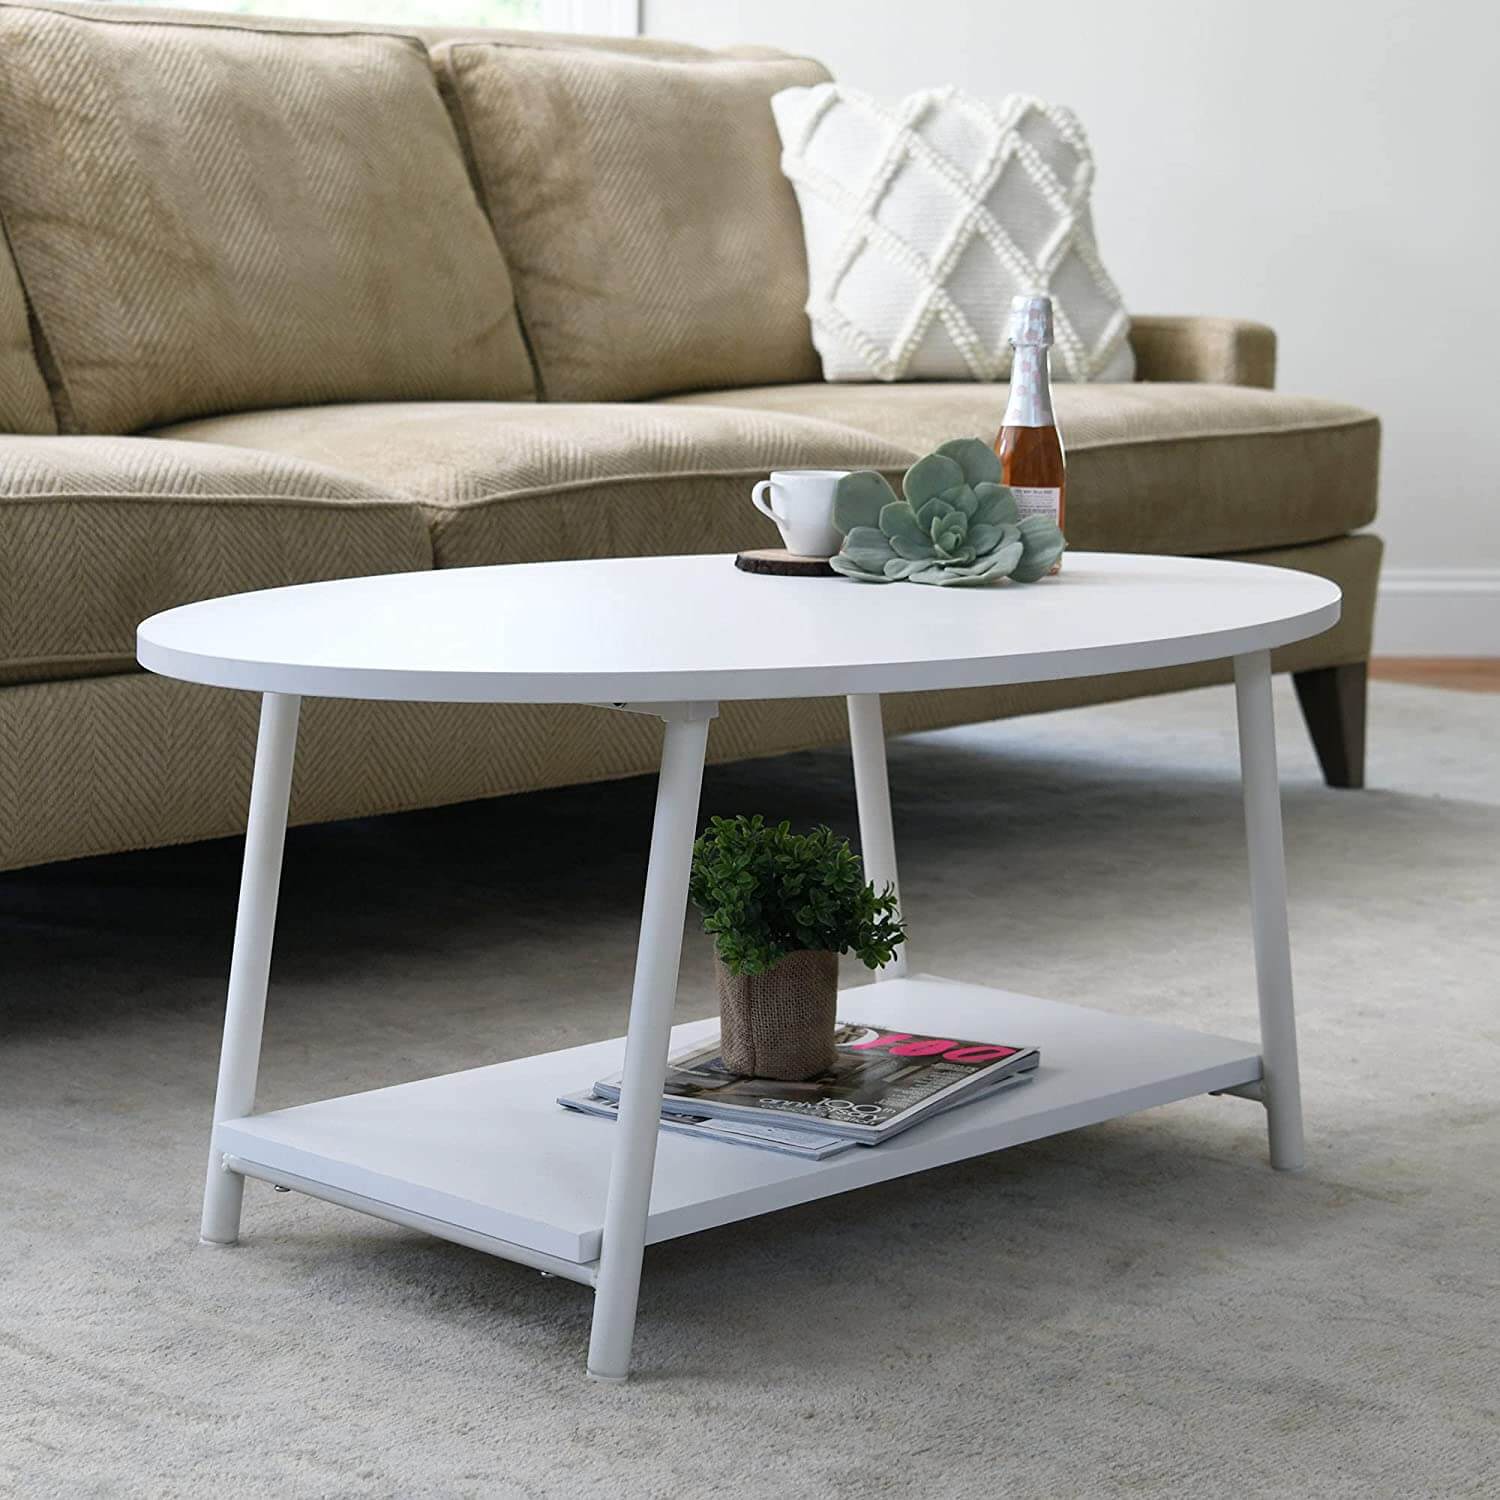 Household Essentials Jamestown Collection Oval 2-Tier Coffee Table with Shelf, Scandinavian White